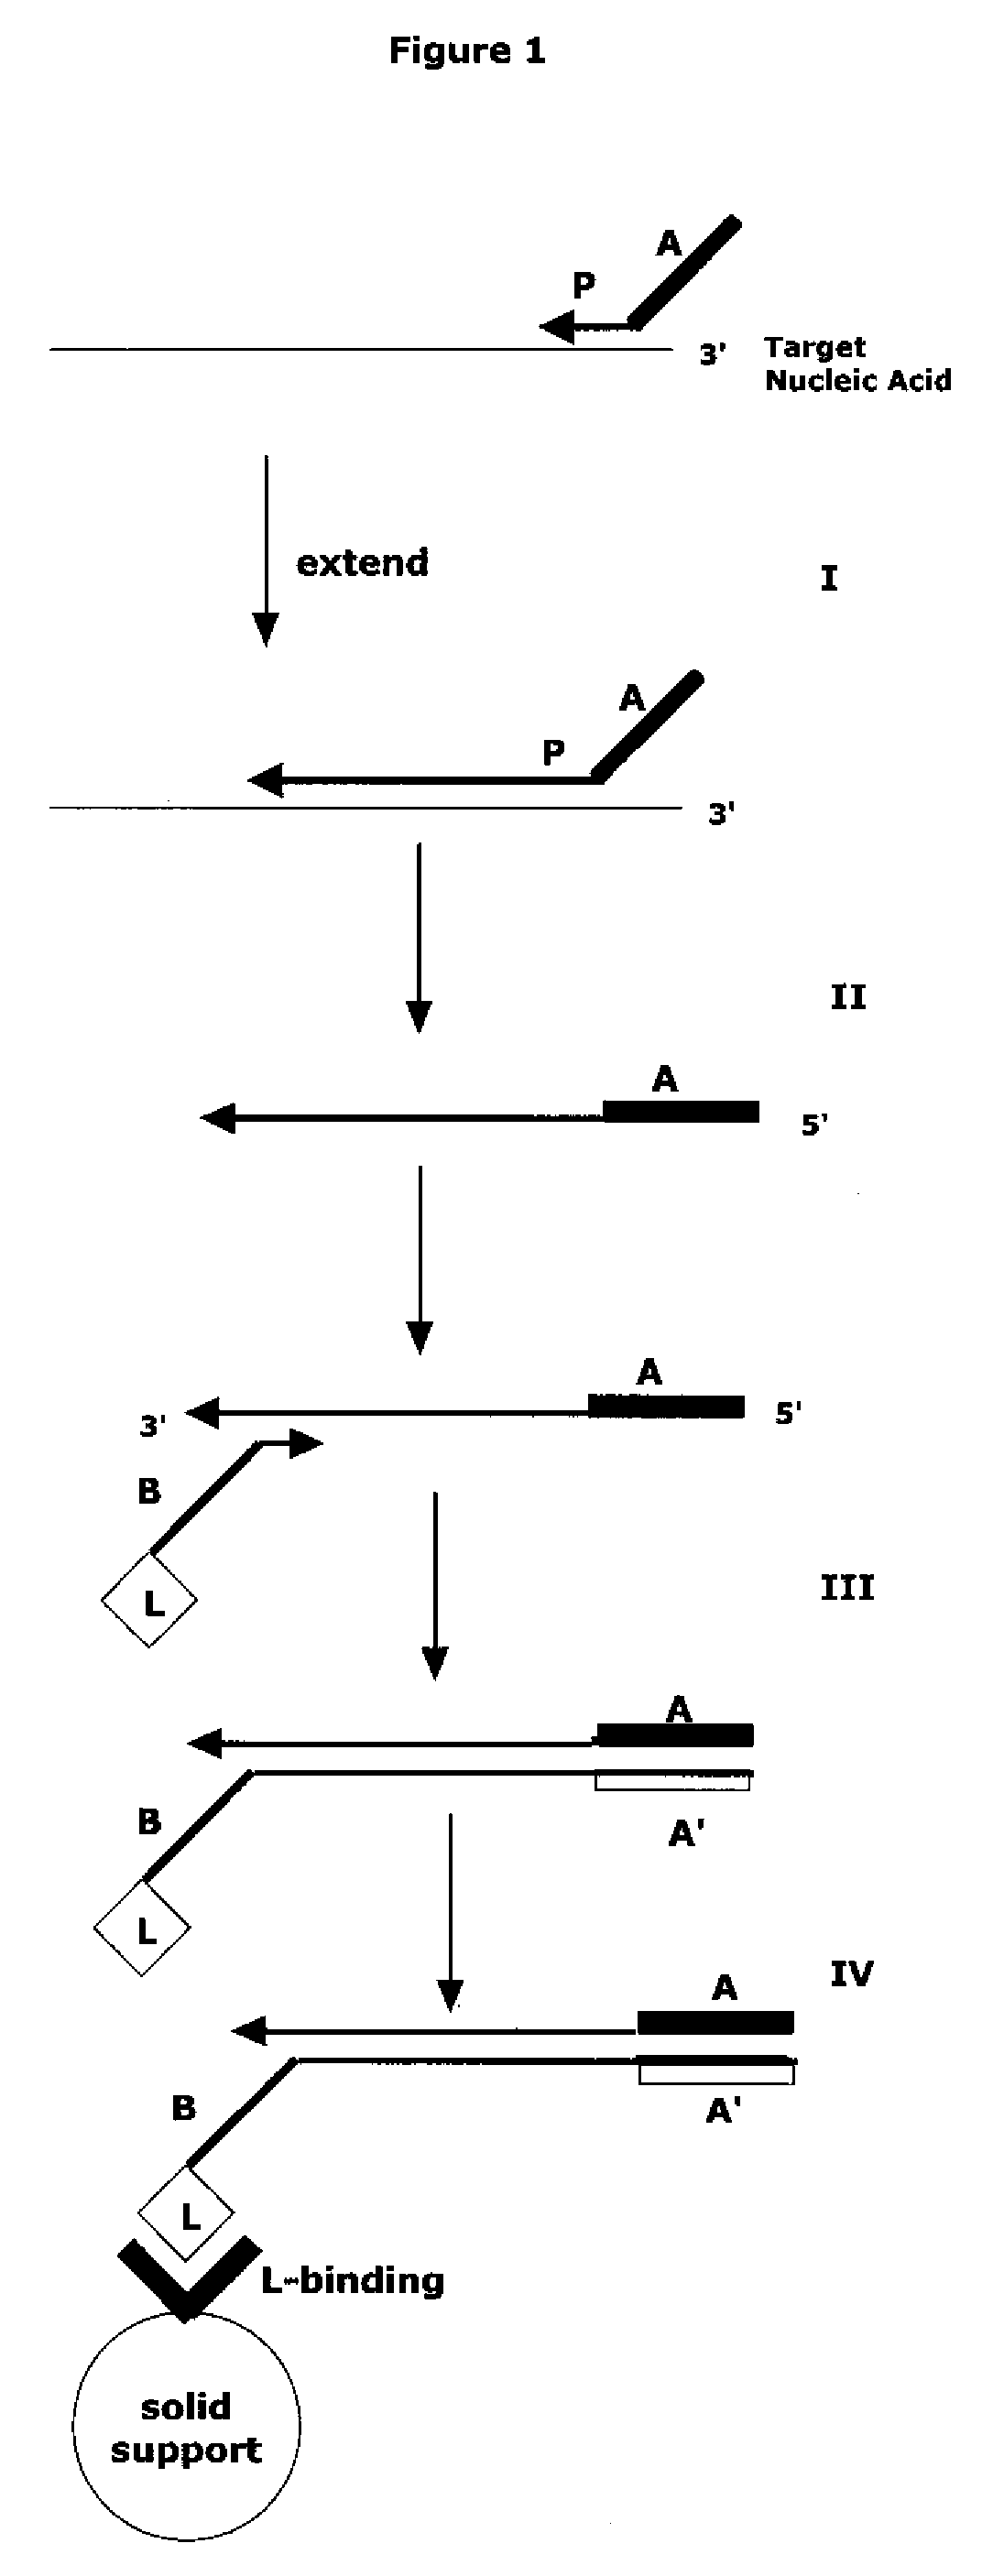 Method for Archiving and Clonal Expansion